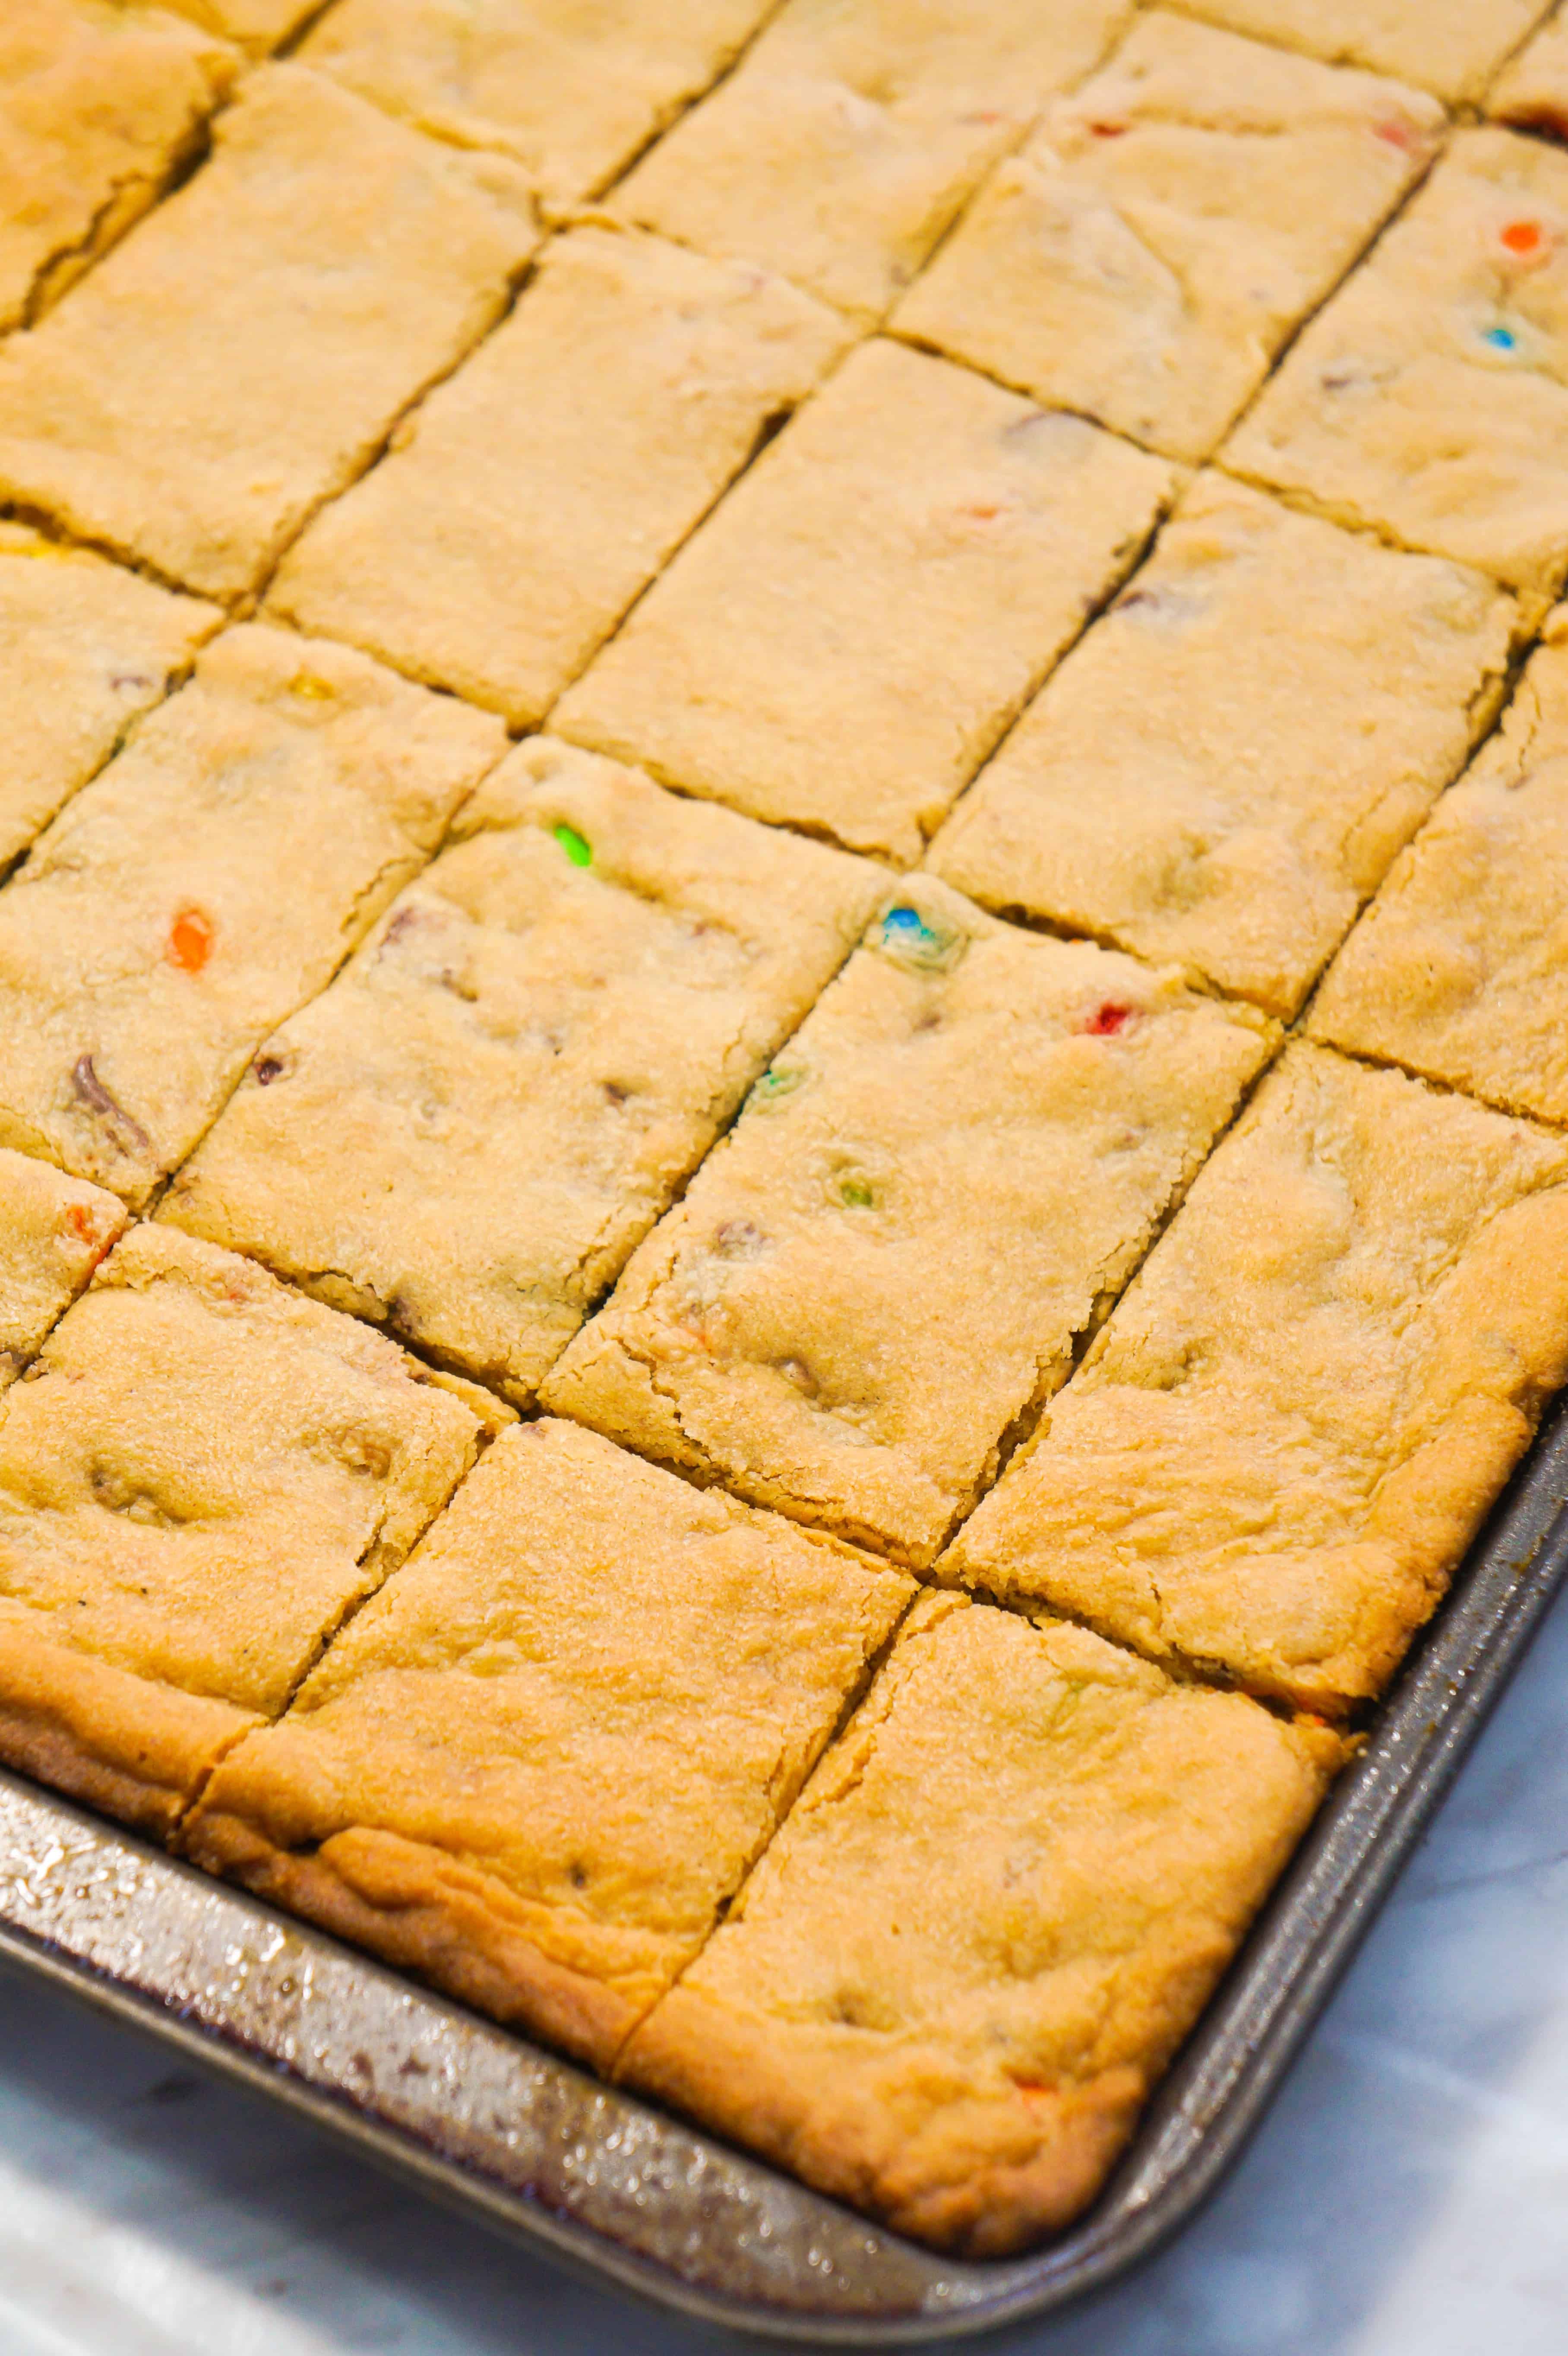 Peanut Butter Cookie Bars are an easy dessert recipe